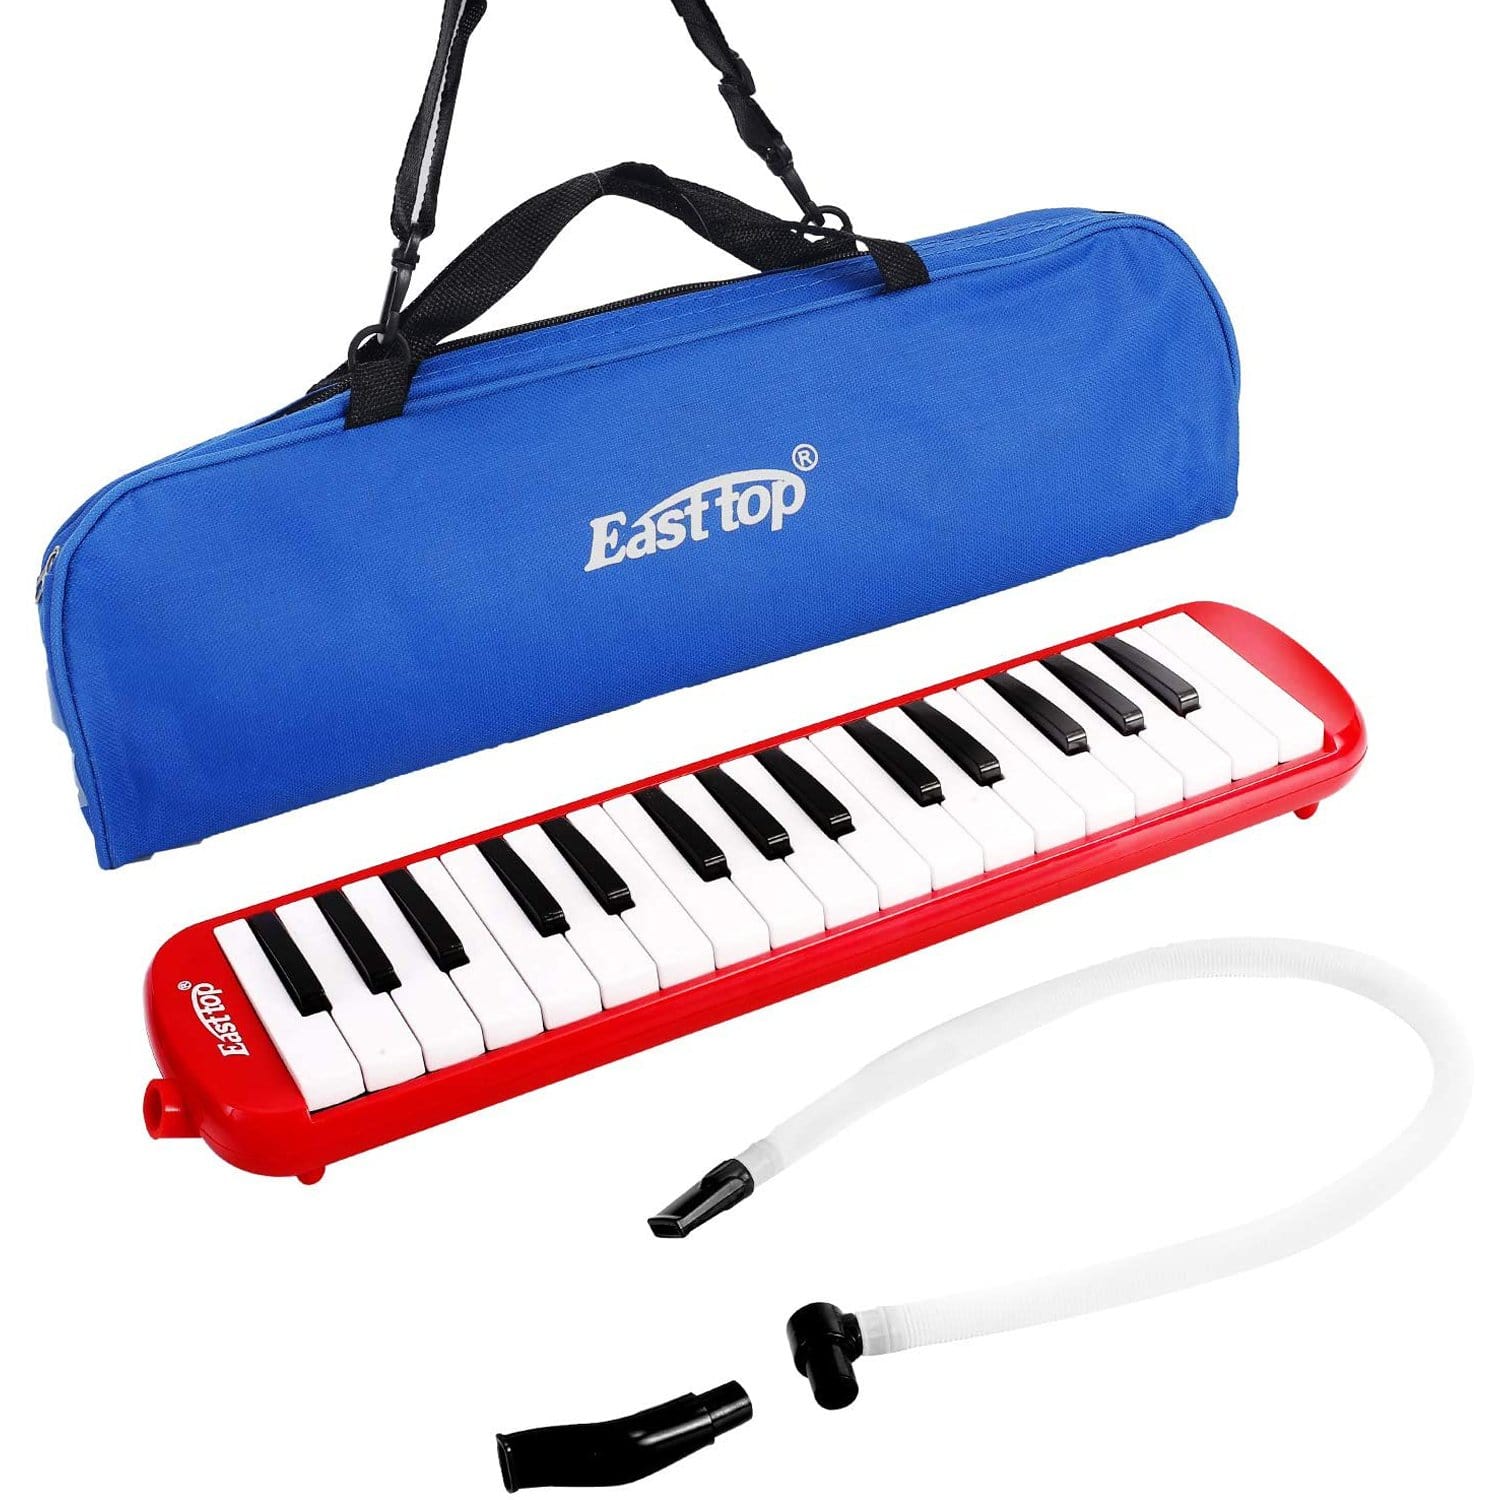 East top 32-Key Professional Mouth Melodica, Instrument Mouth Keyboard Organ Melodica Set-Black - Easttop harmonica